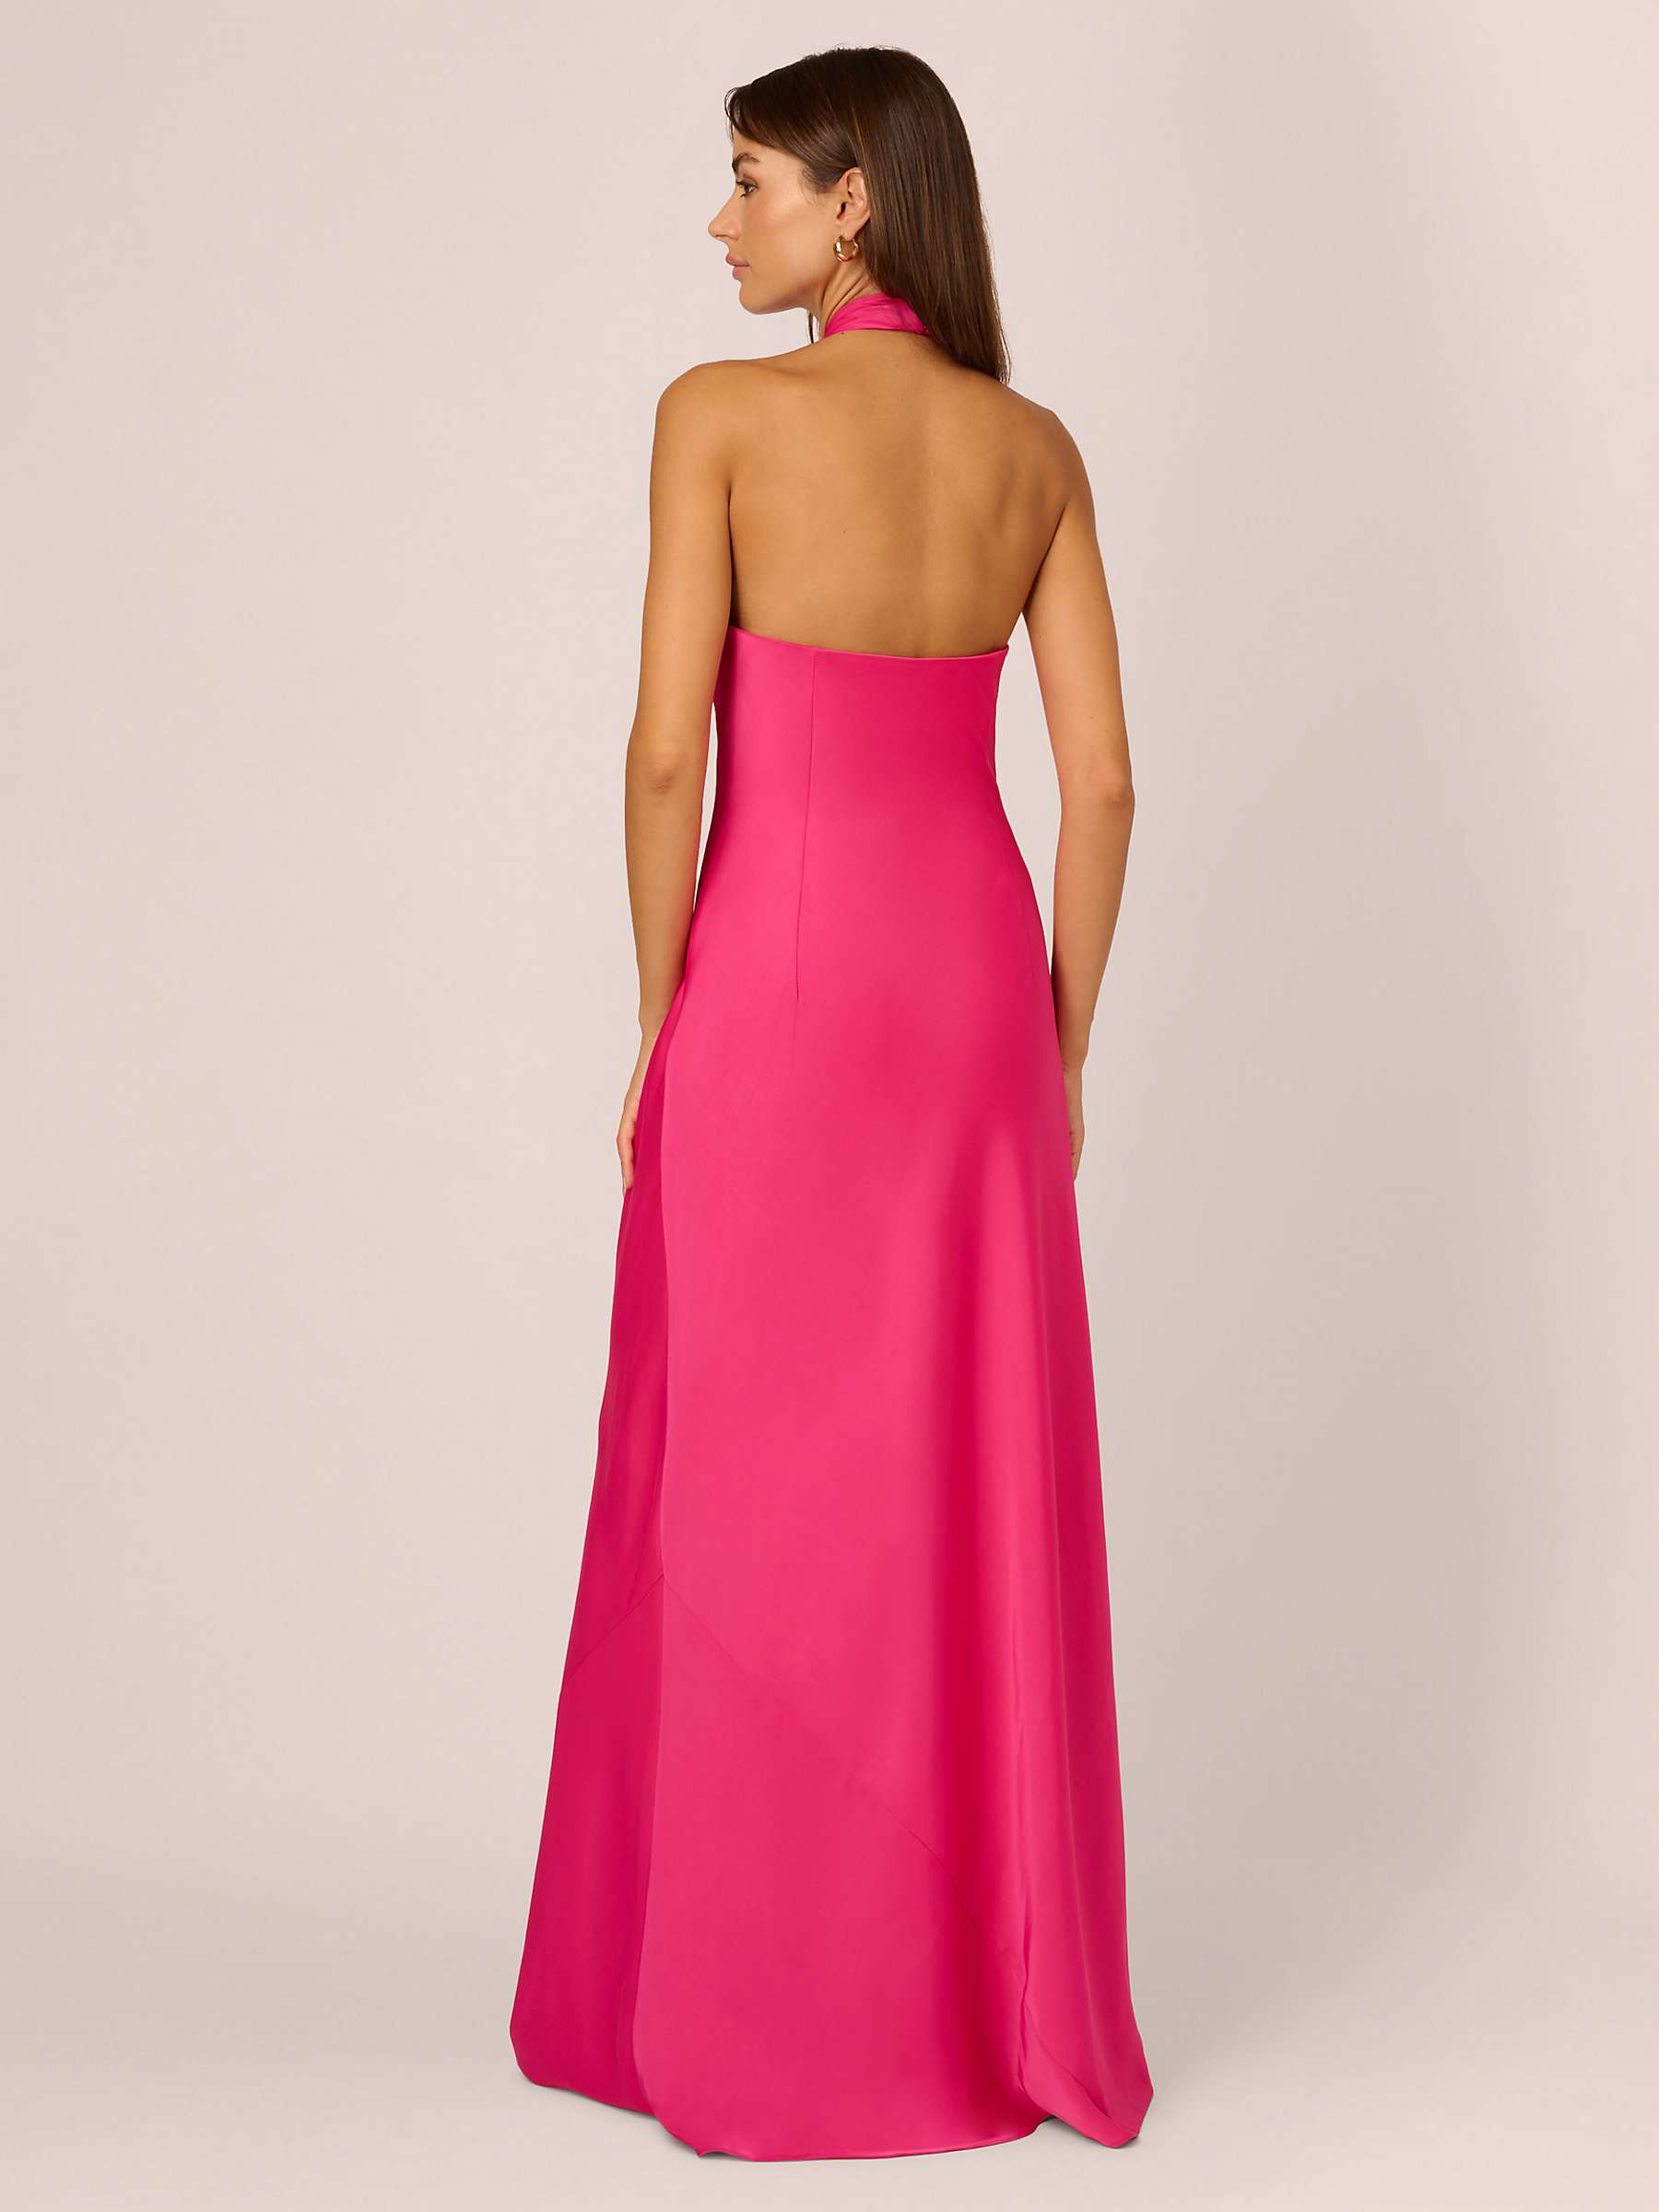 Buy Adrianna by Adrianna Papell Halterneck Stretch Satin Maxi Dress, Hot Pink Online at johnlewis.com